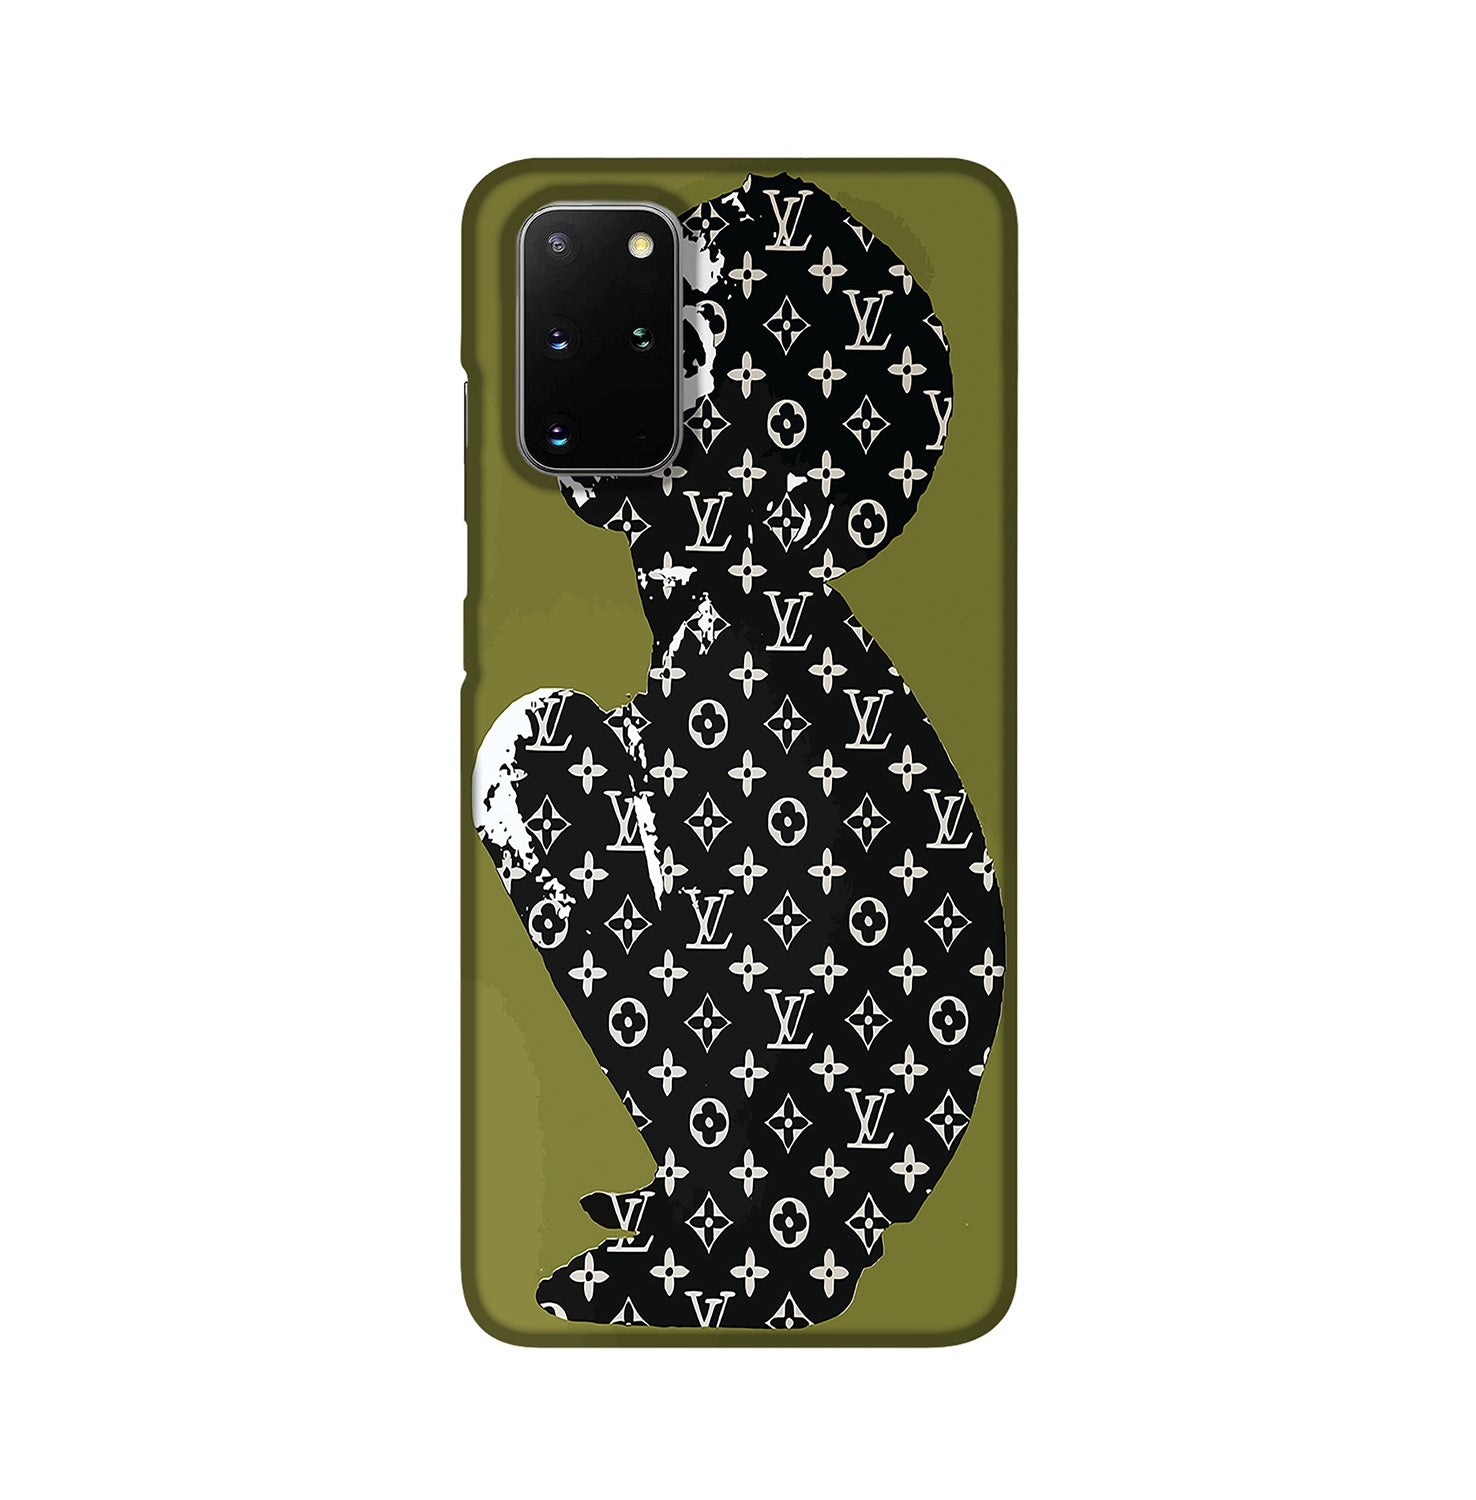 she got excited with this LV case for her Samsung s9